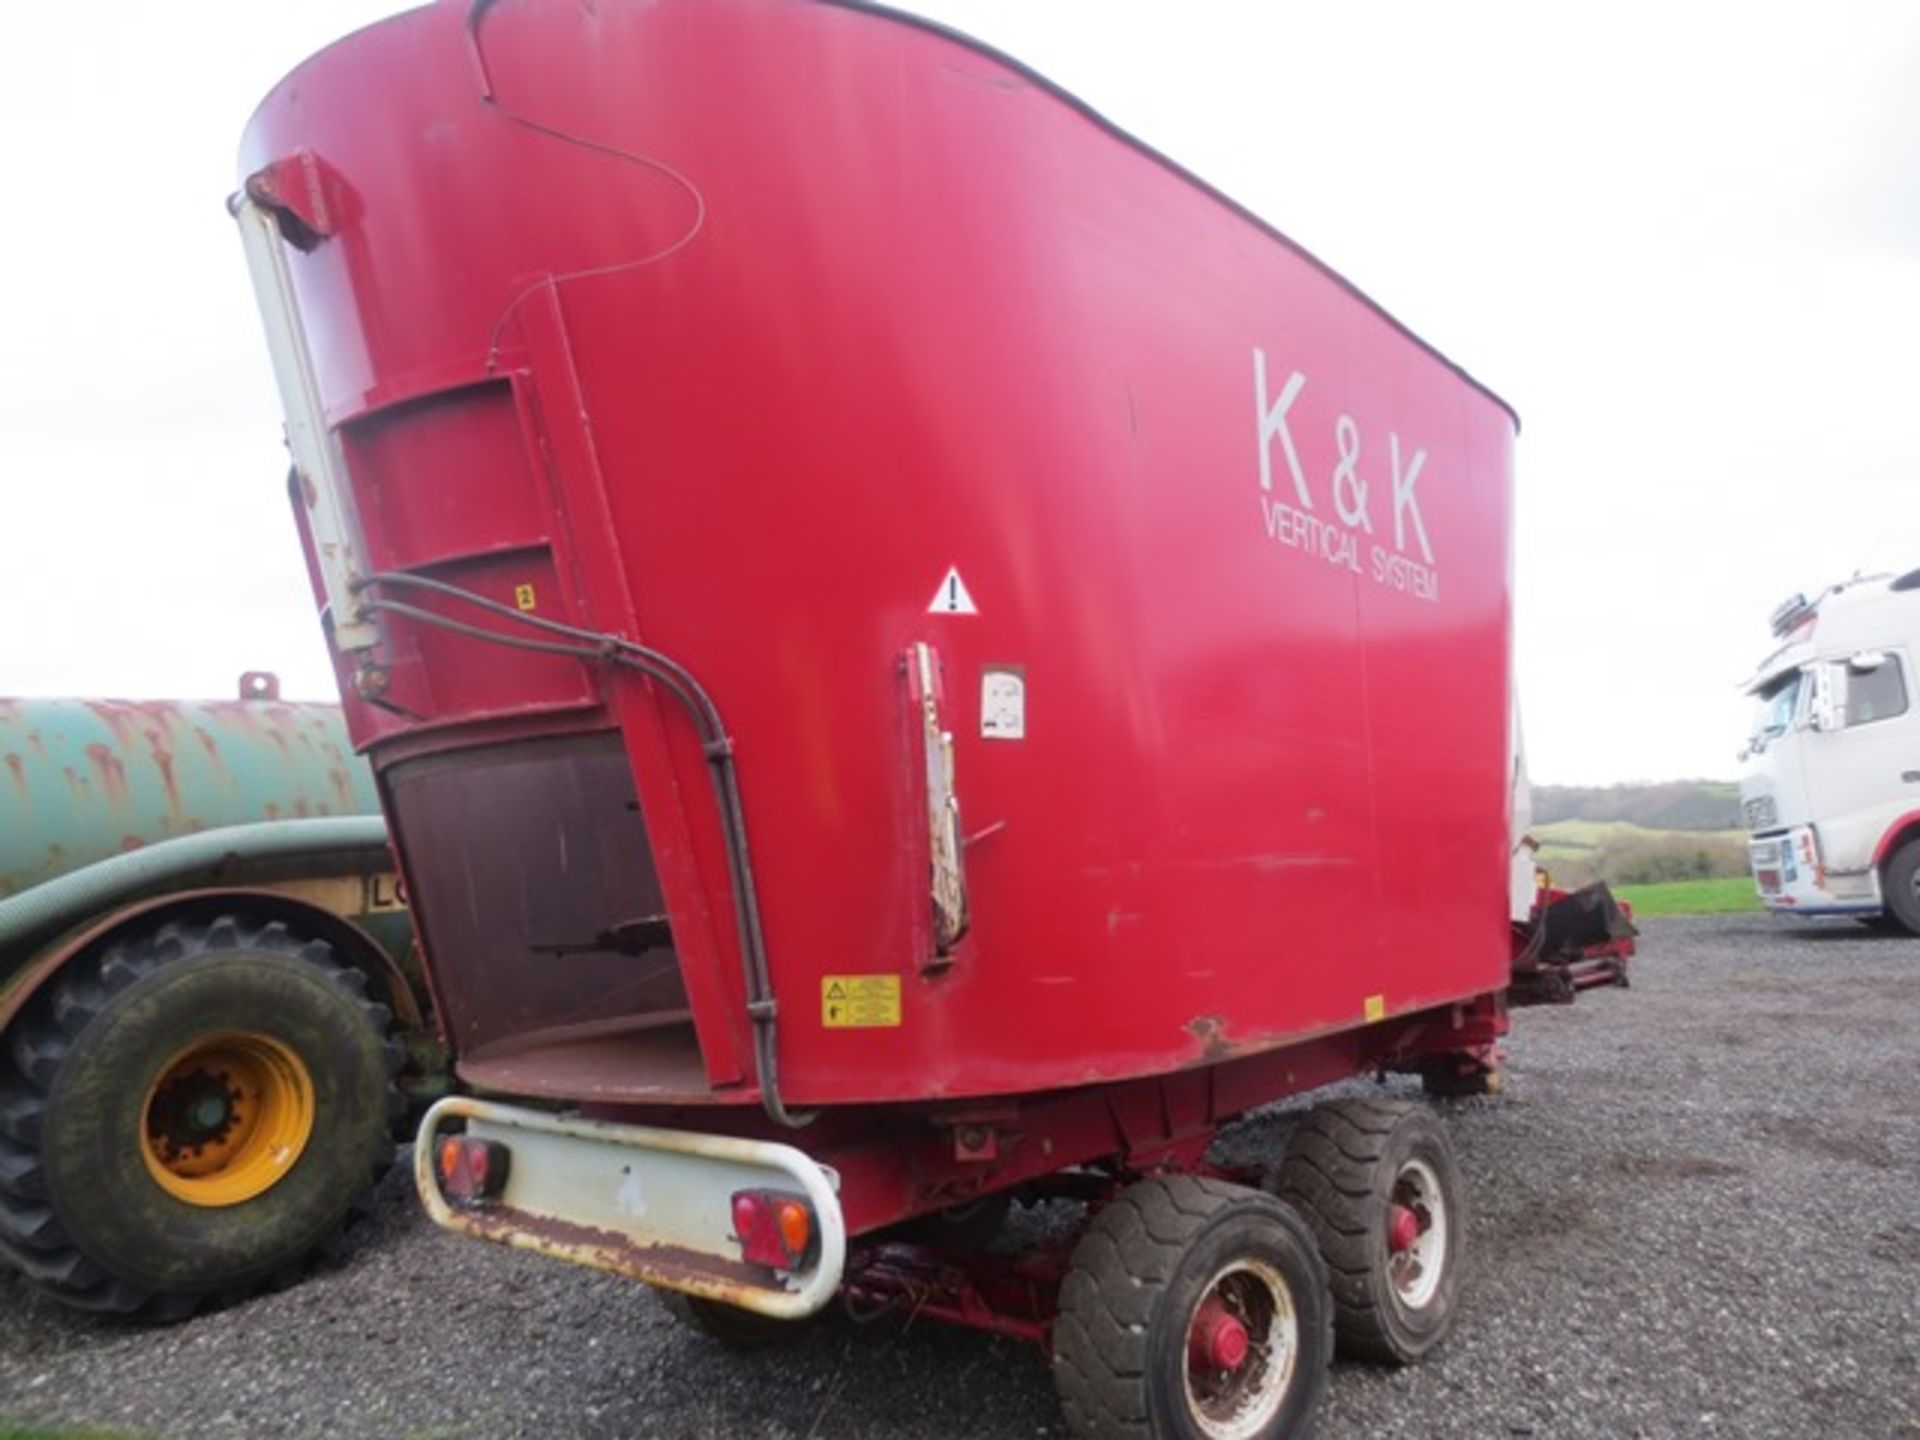 K&K/ Mutti International MC22 large hopper feed mixer trailer, Serial No: 11773 (2004) with Dinamica - Image 7 of 7